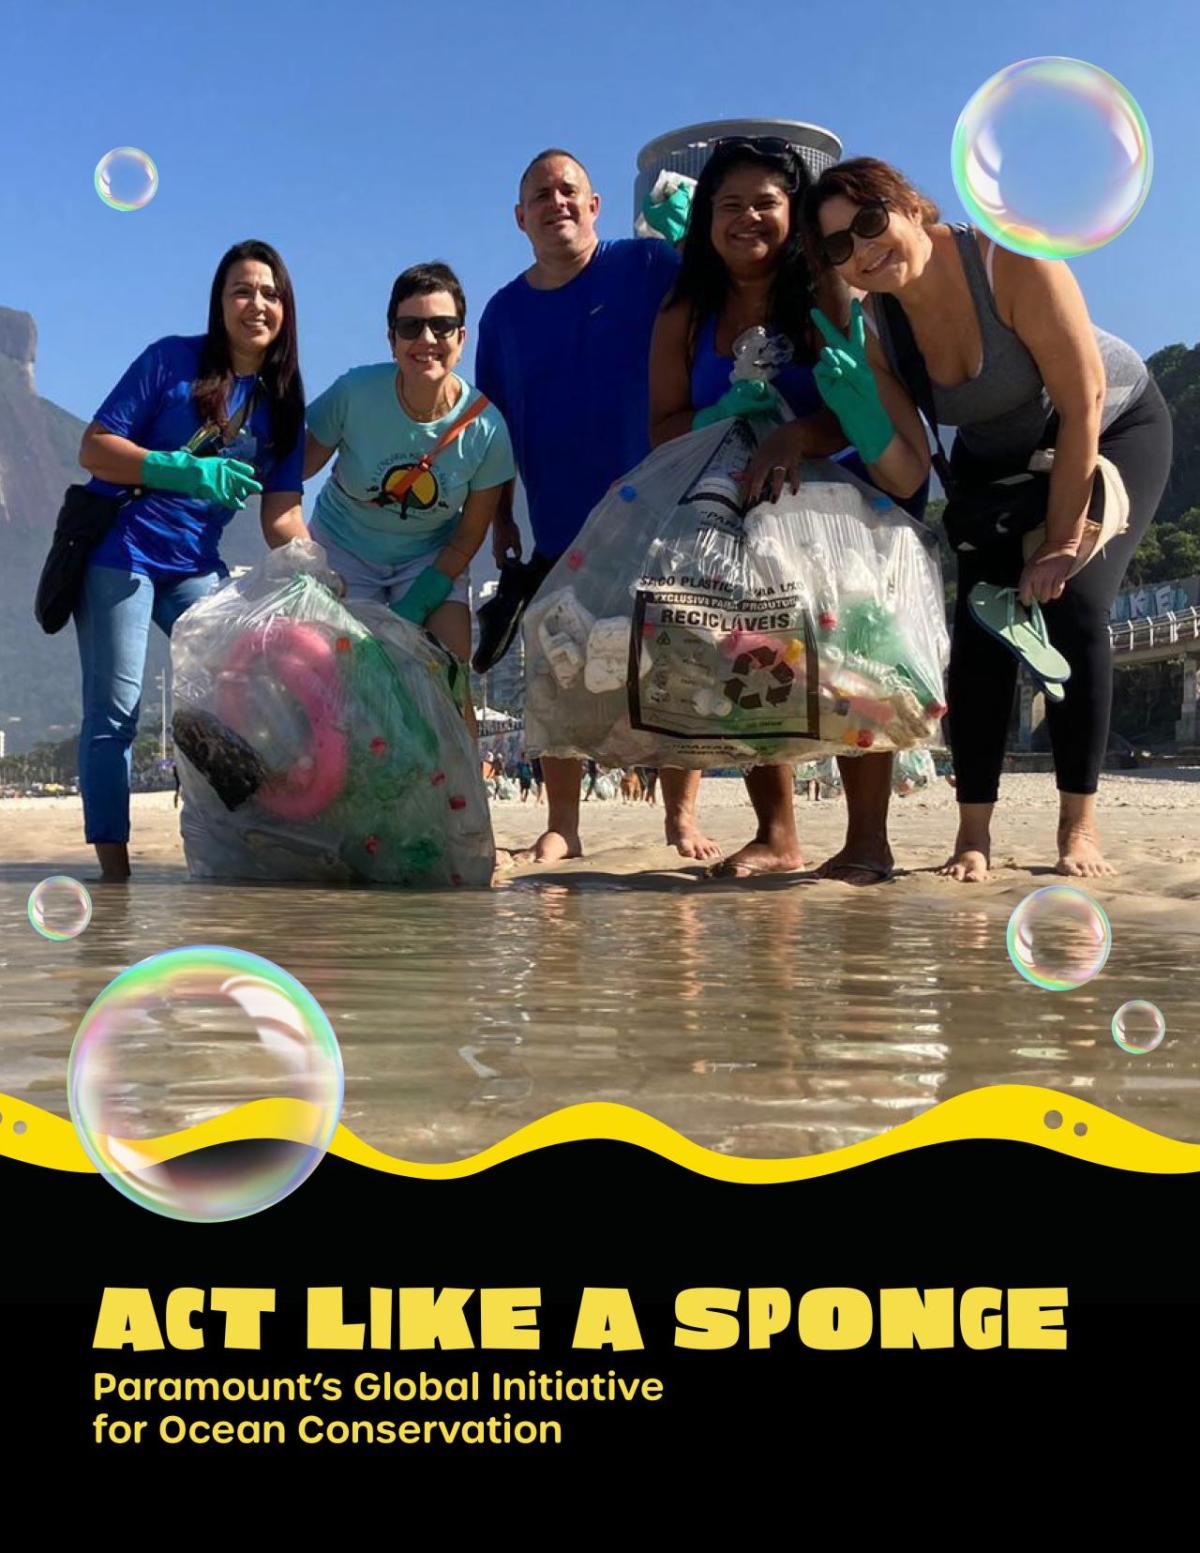 "Act like a sponge, Paramount's Global Initiative for Ocean Conservation" People standing on the beach